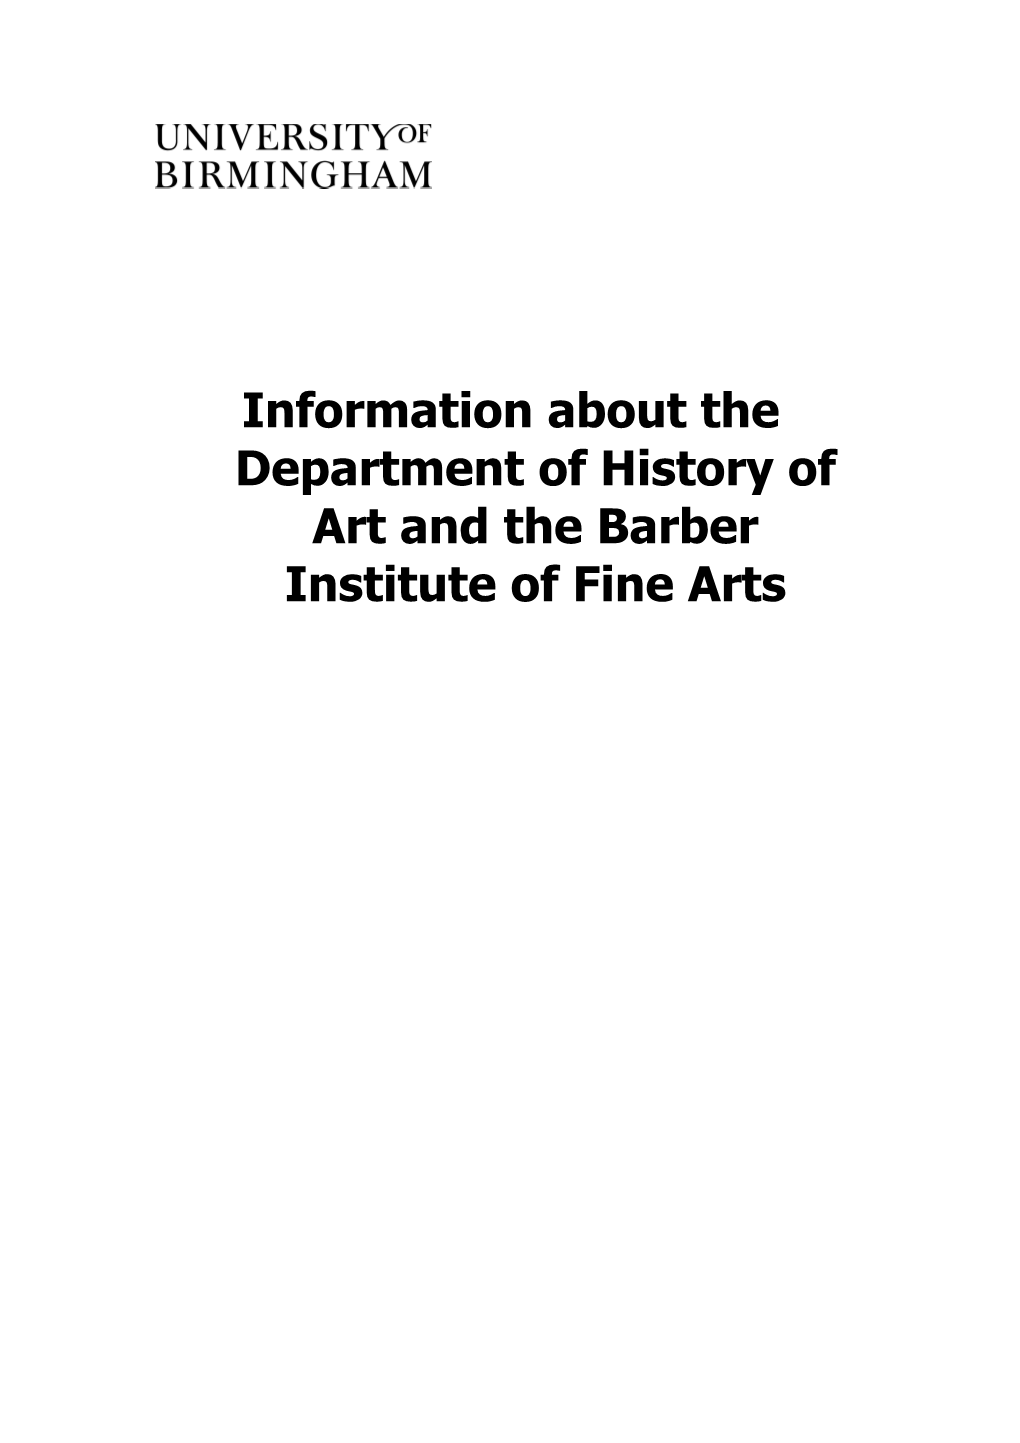 Information About the Department of History of Art and the Barber Institute of Fine Arts